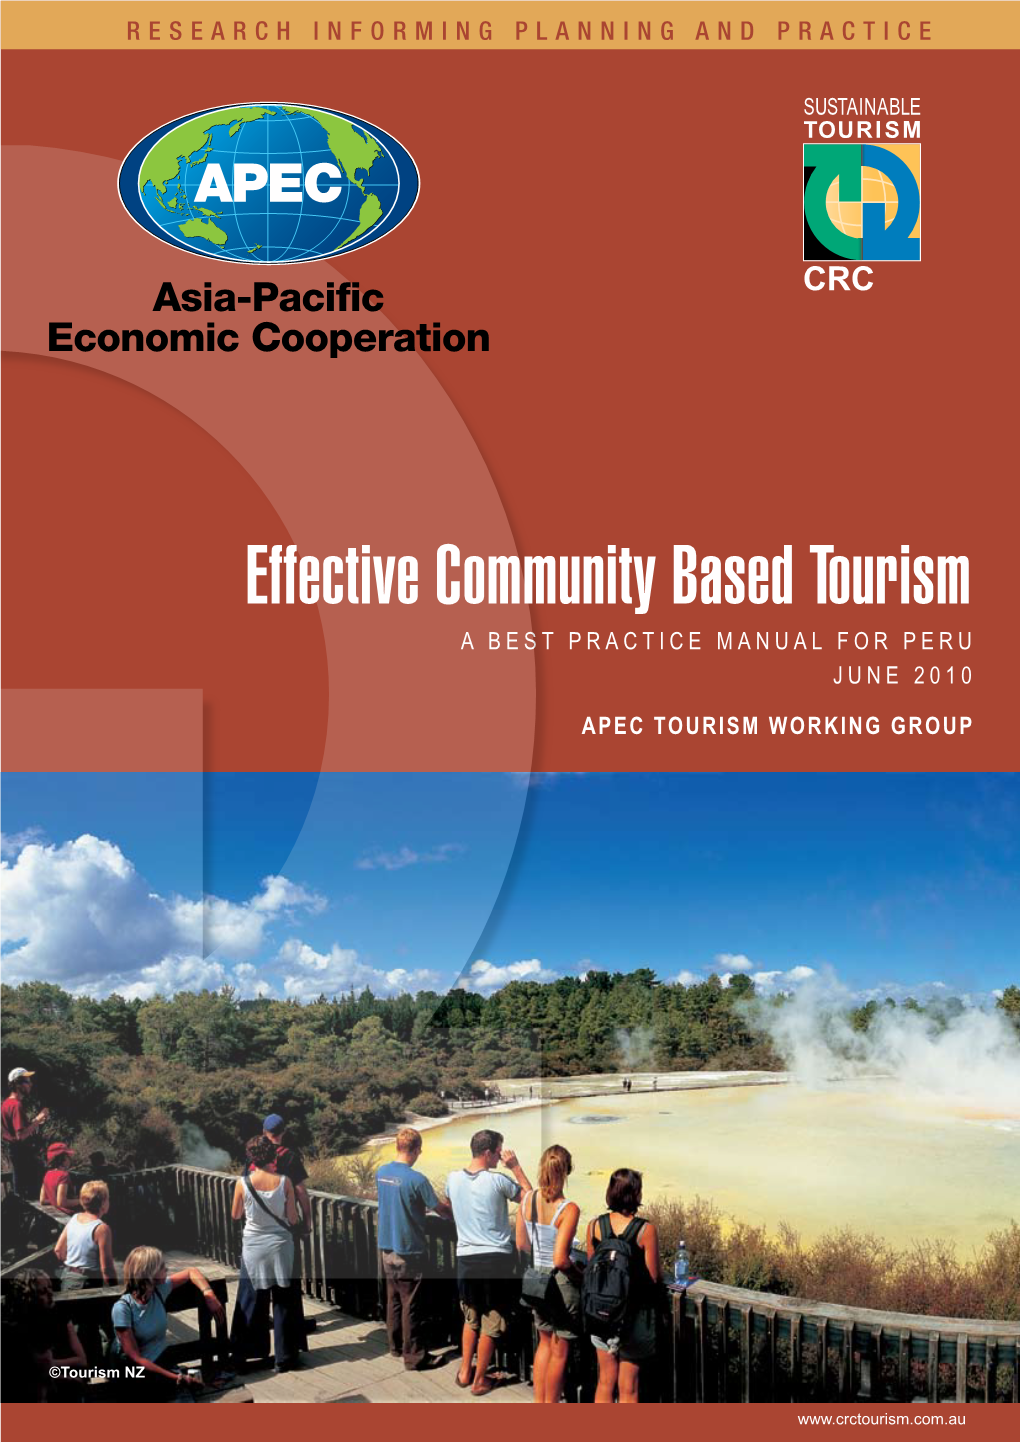 Effective Community Based Tourism a BEST Practice Manual for PERU June 2010